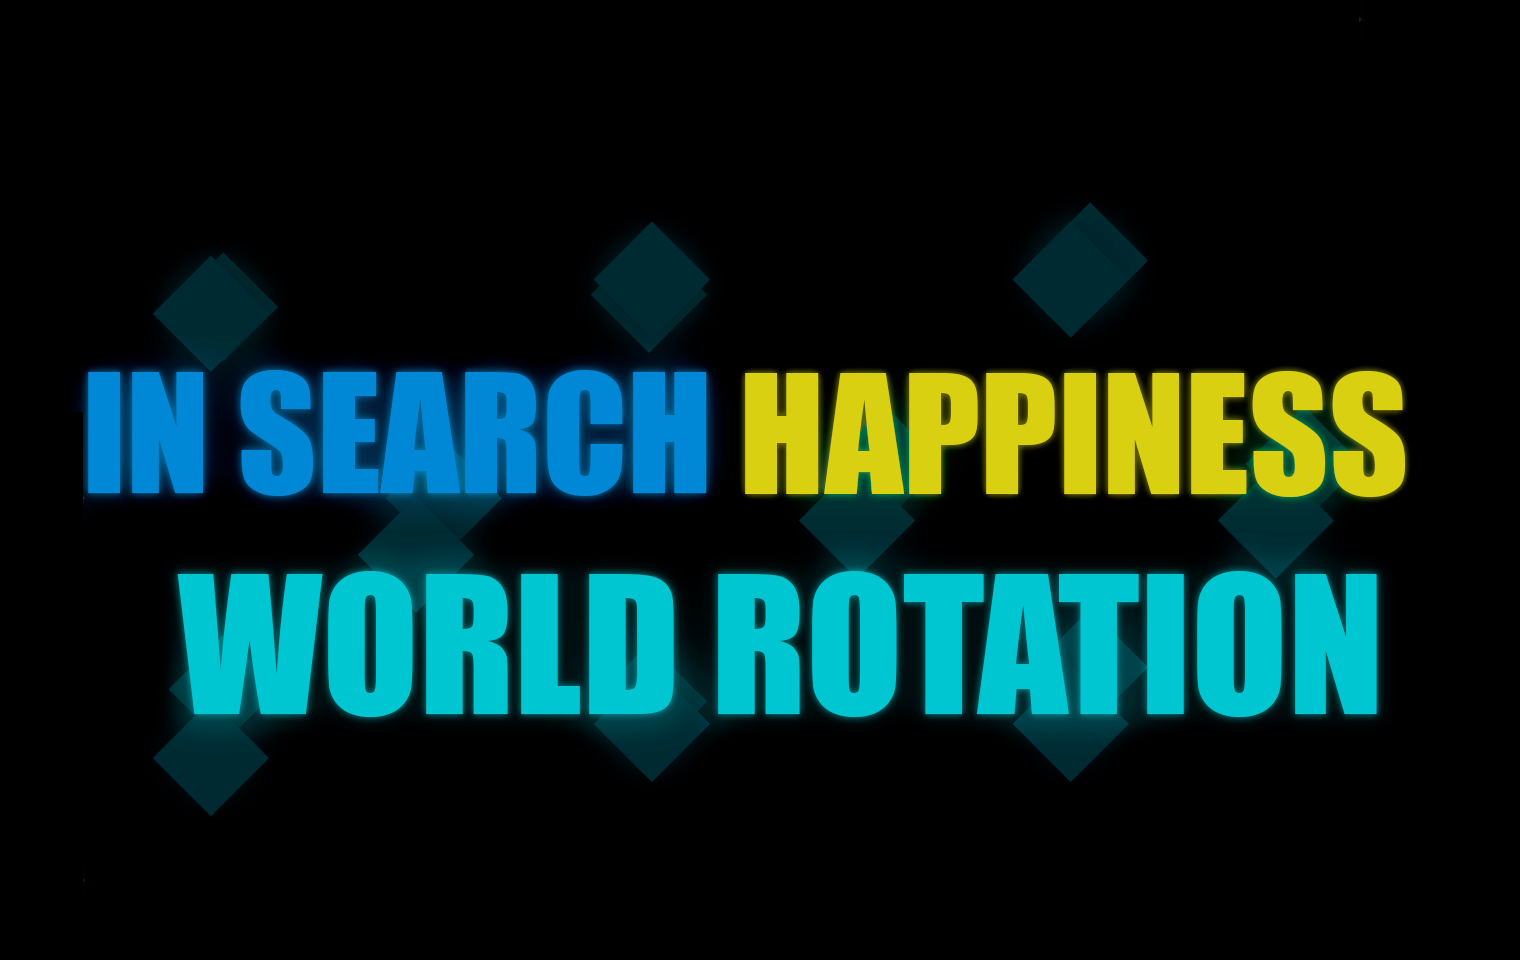 In Search of Happiness World Rotation